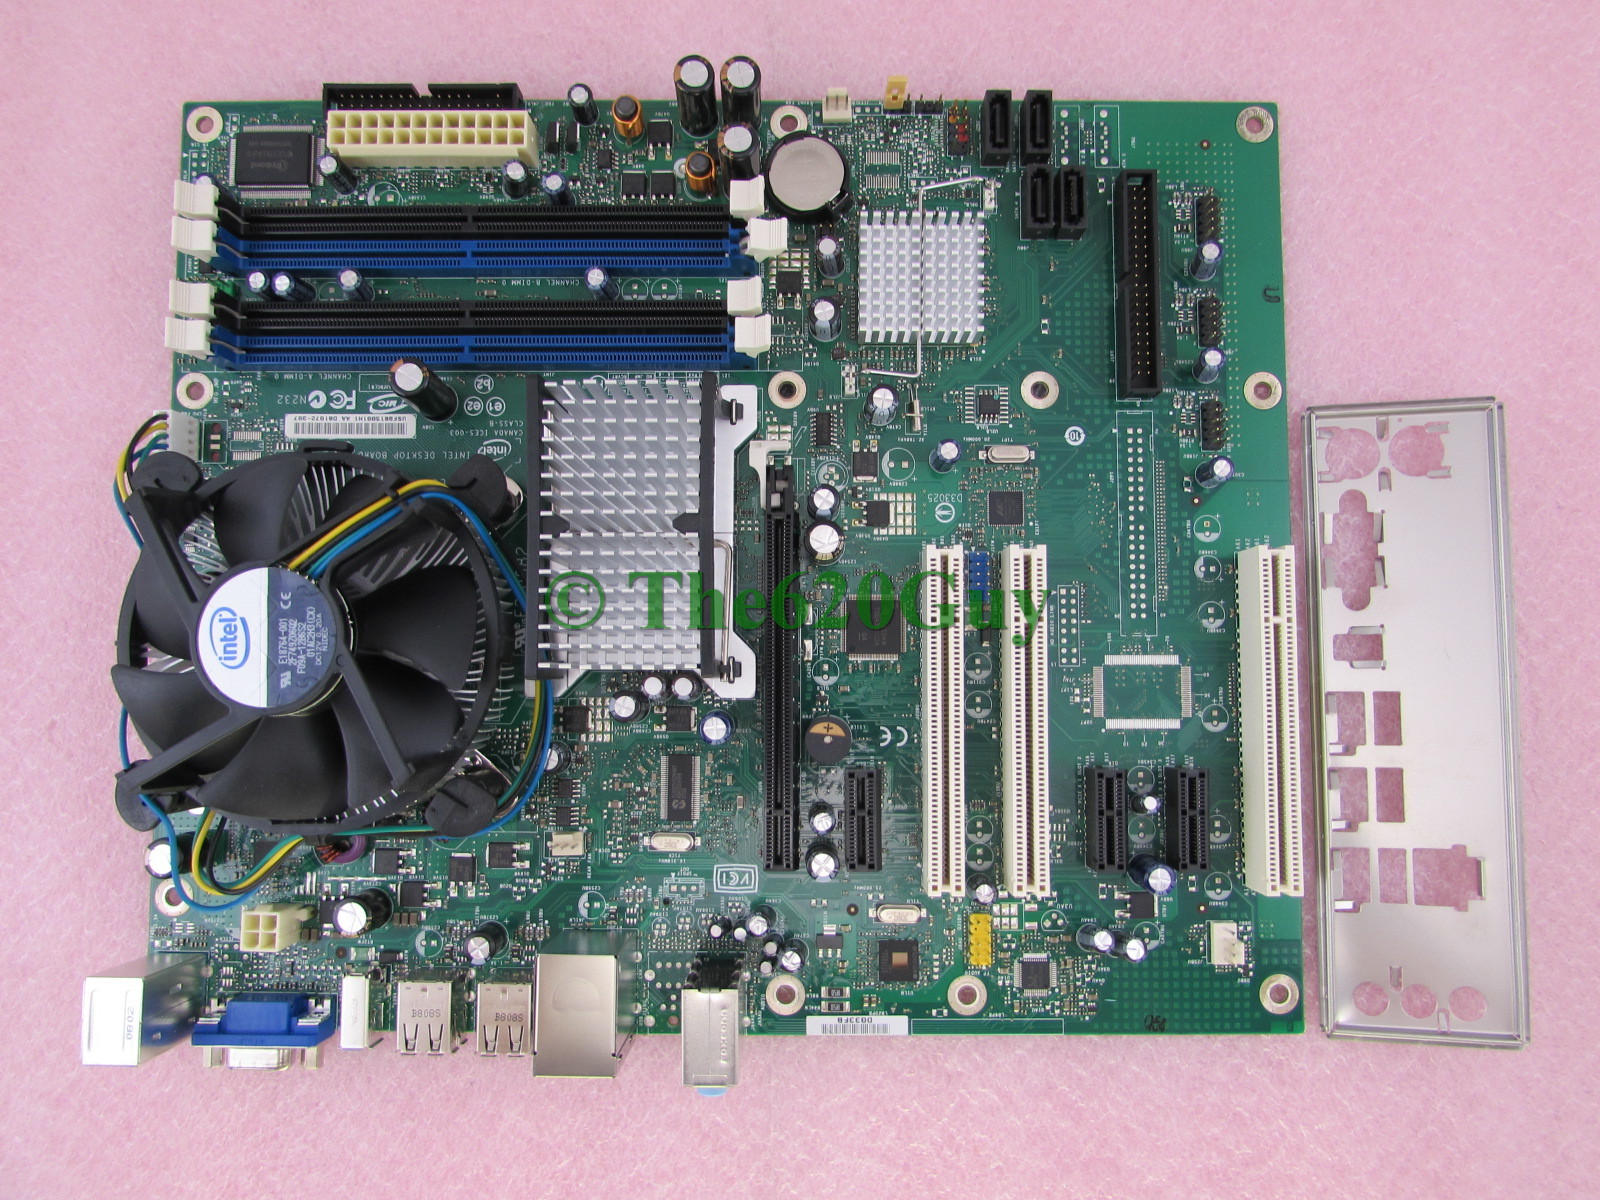 Intel dg33fb motherboard driver - Drivers you need